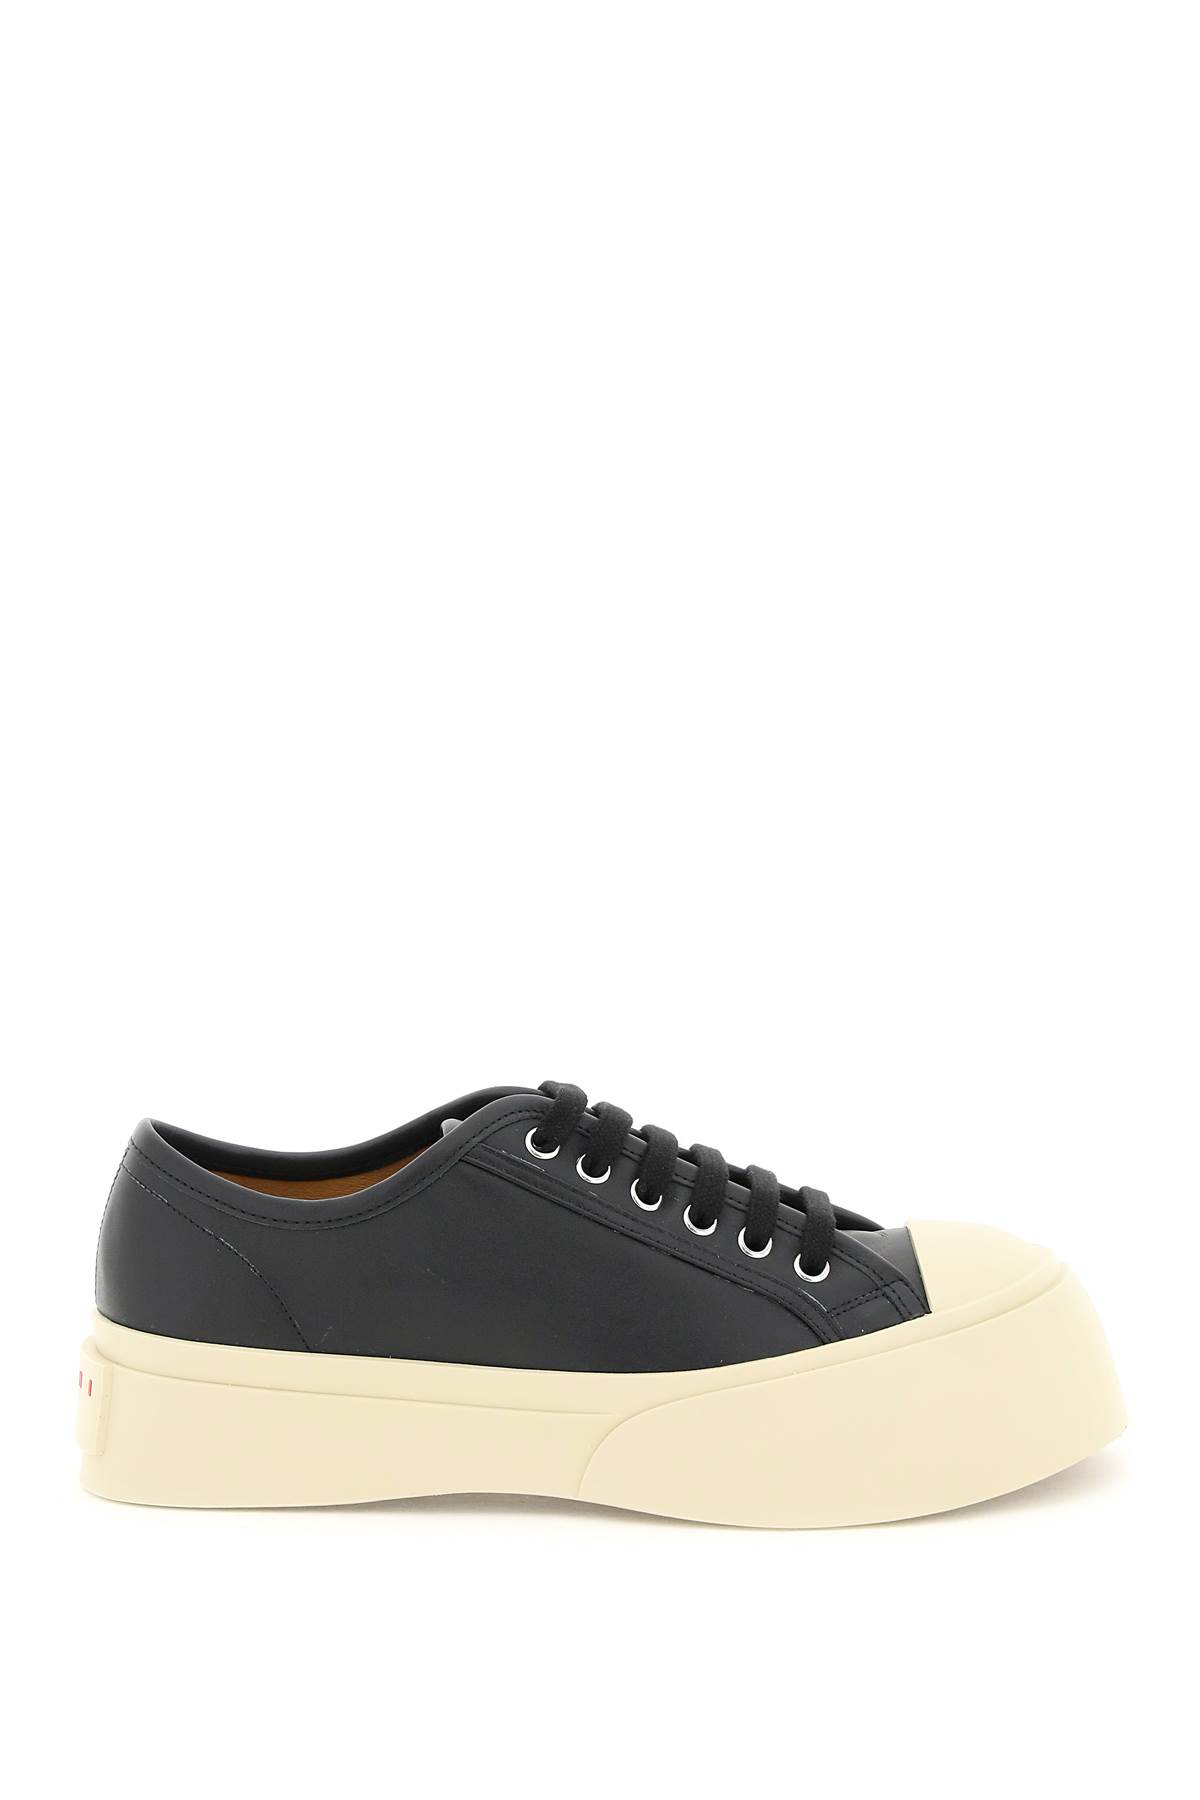 pablo Leather Sneakers Marni